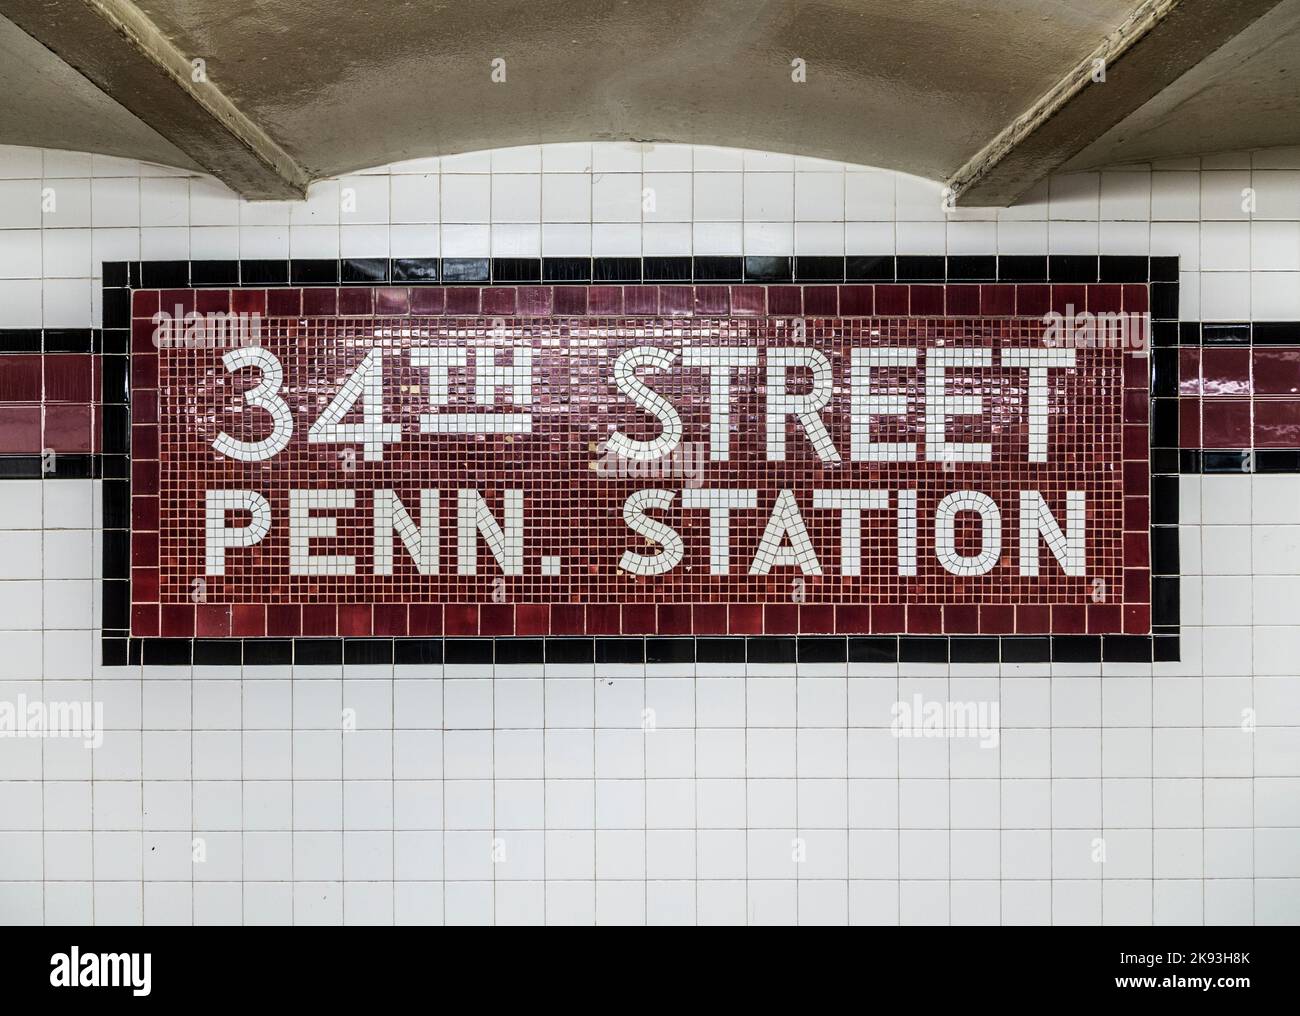 New York, USA - October 21, 2015: old vintage sign in the metro at the 34th Street Pennsylvania Station Subway stop in New York City. Stock Photo